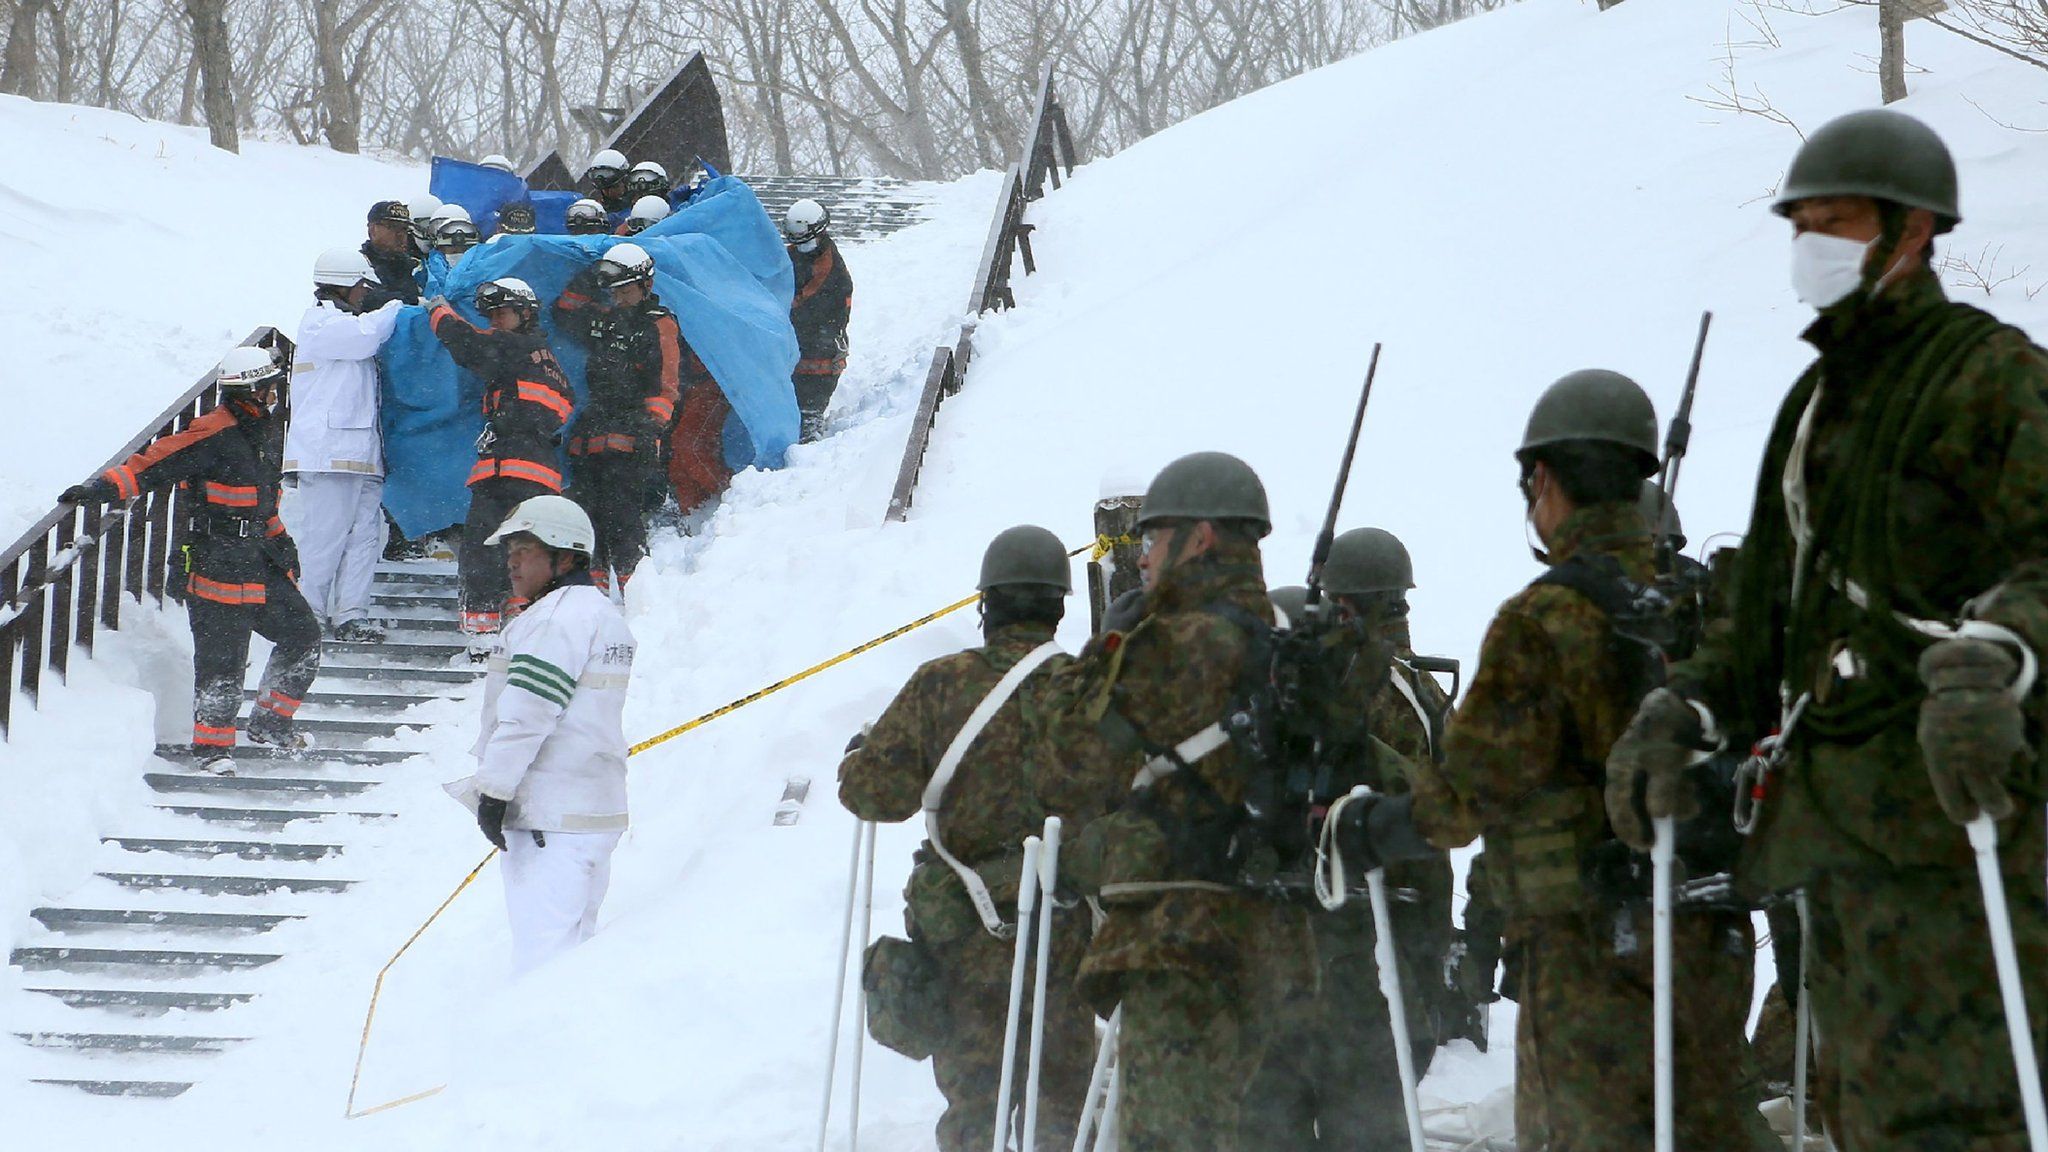 Firefighters carry a survivor they rescued from the site of an avalanche in Nasu town, Tochigi prefecture on 27 March 2017, while Self Defense Force personnel look on